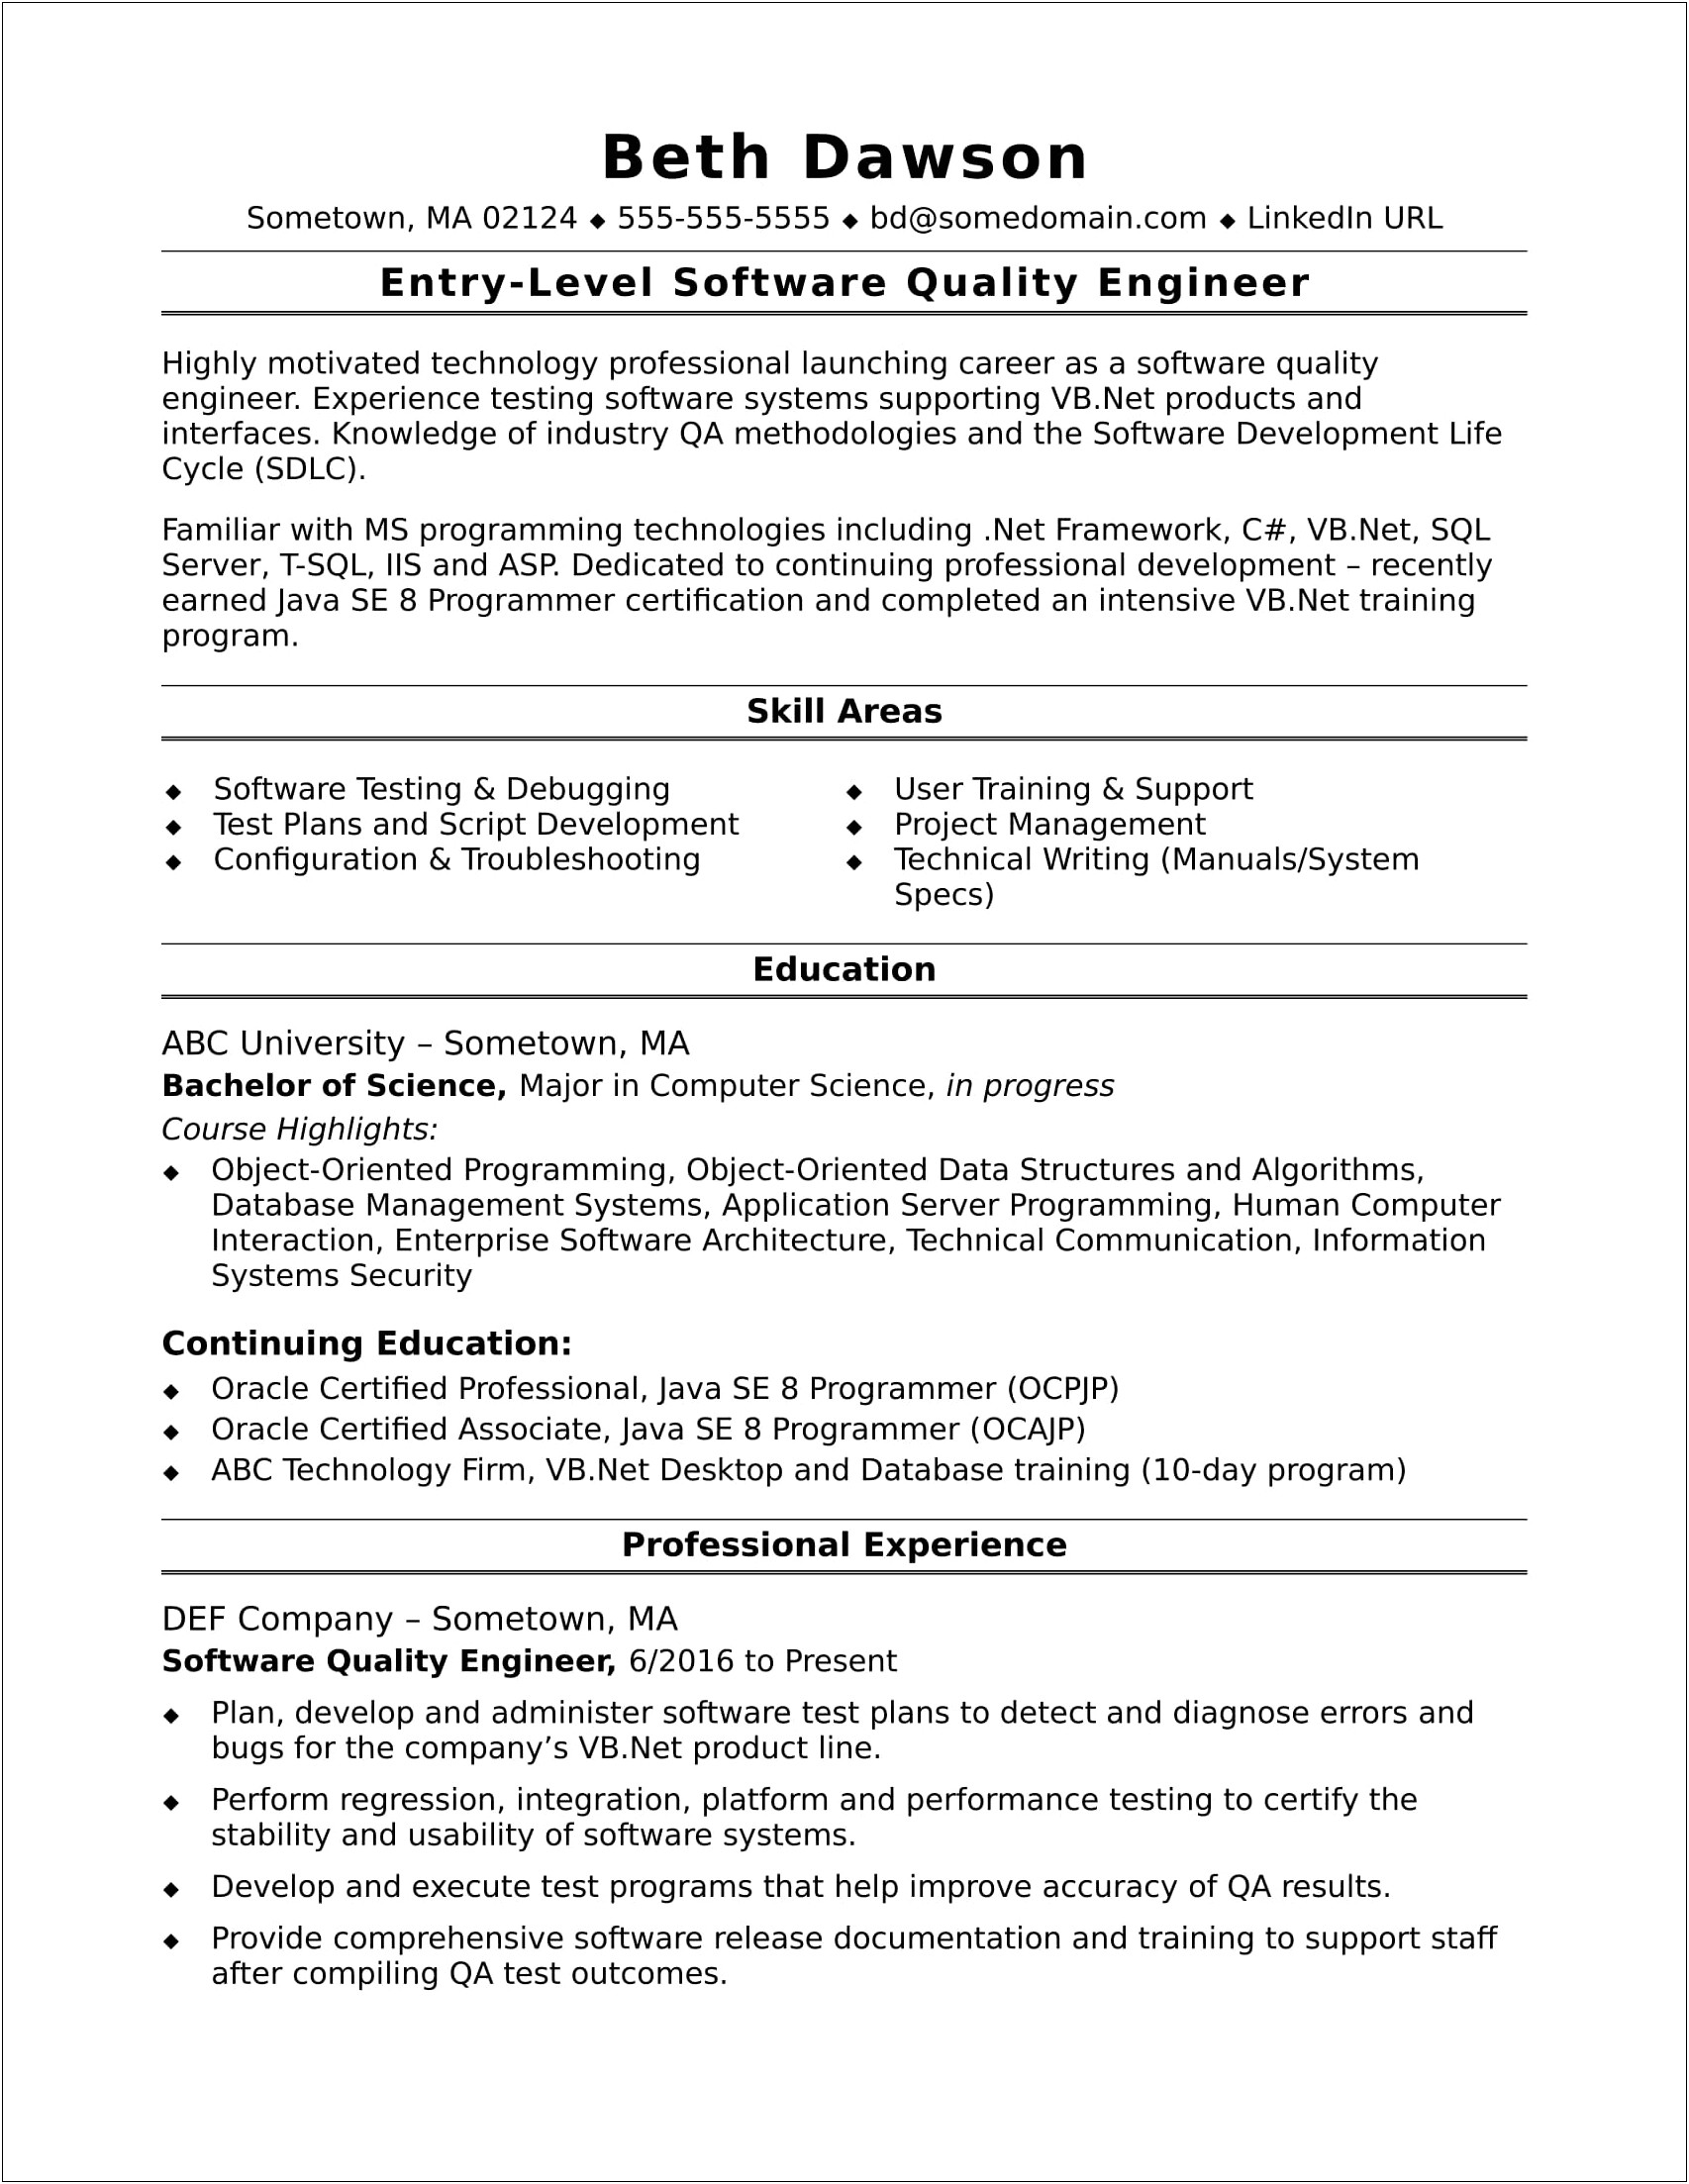 Career Summary For Entry Level Engineer Resume